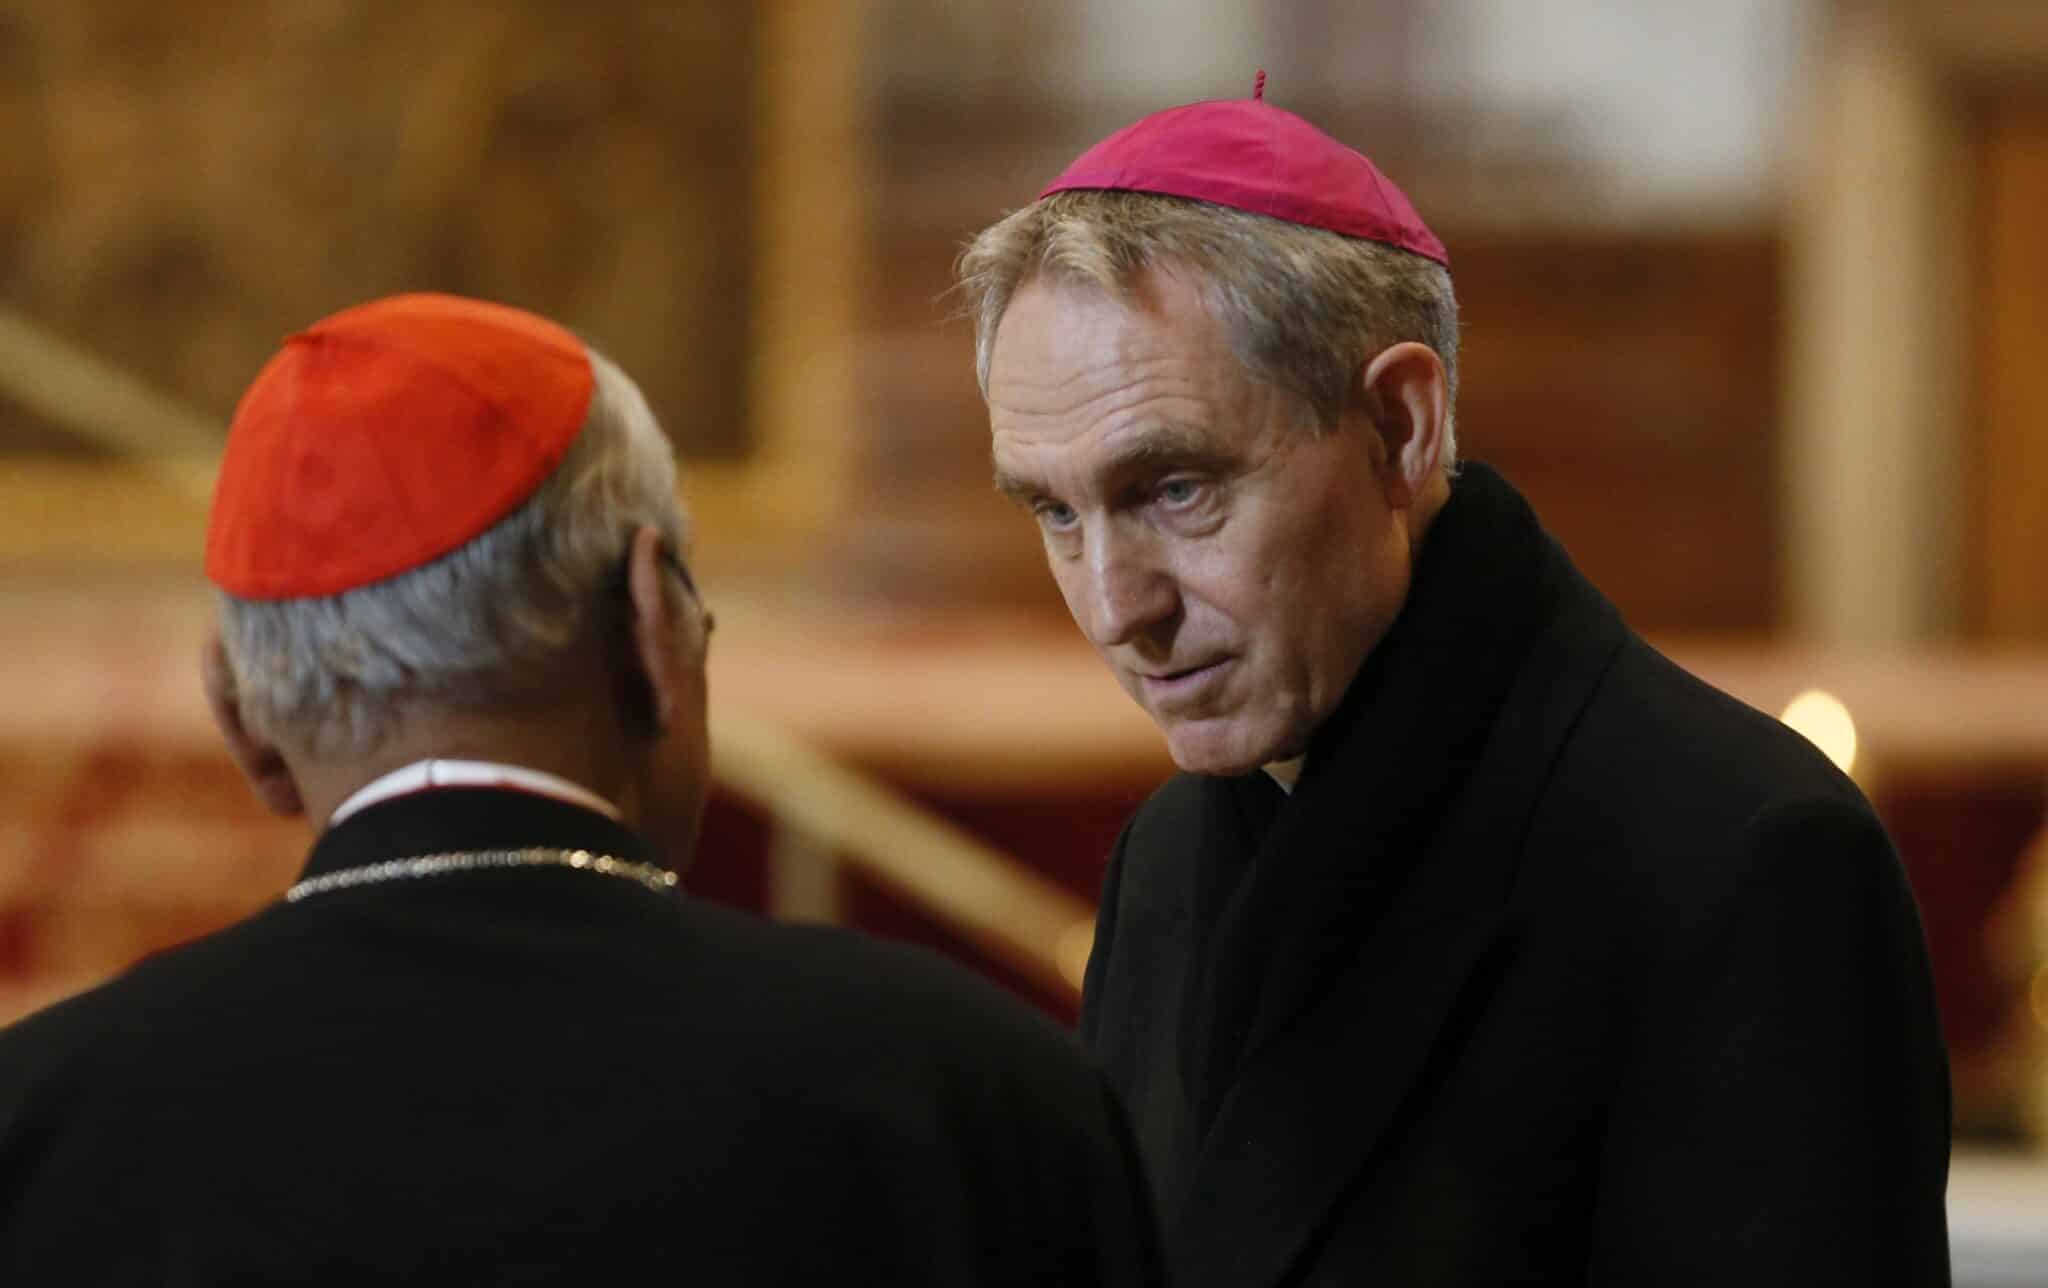 Archbishop Georg Gänswein, right, who was private secretary to Pope Benedict XVI, talks with Cardinal Malcolm Ranjith of Colombo, Sri Lanka, as people pay their respects at the body of Pope Benedict in St. Peter's Basilica at the Vatican Jan. 4, 2023. (CNS photo/Paul Haring)